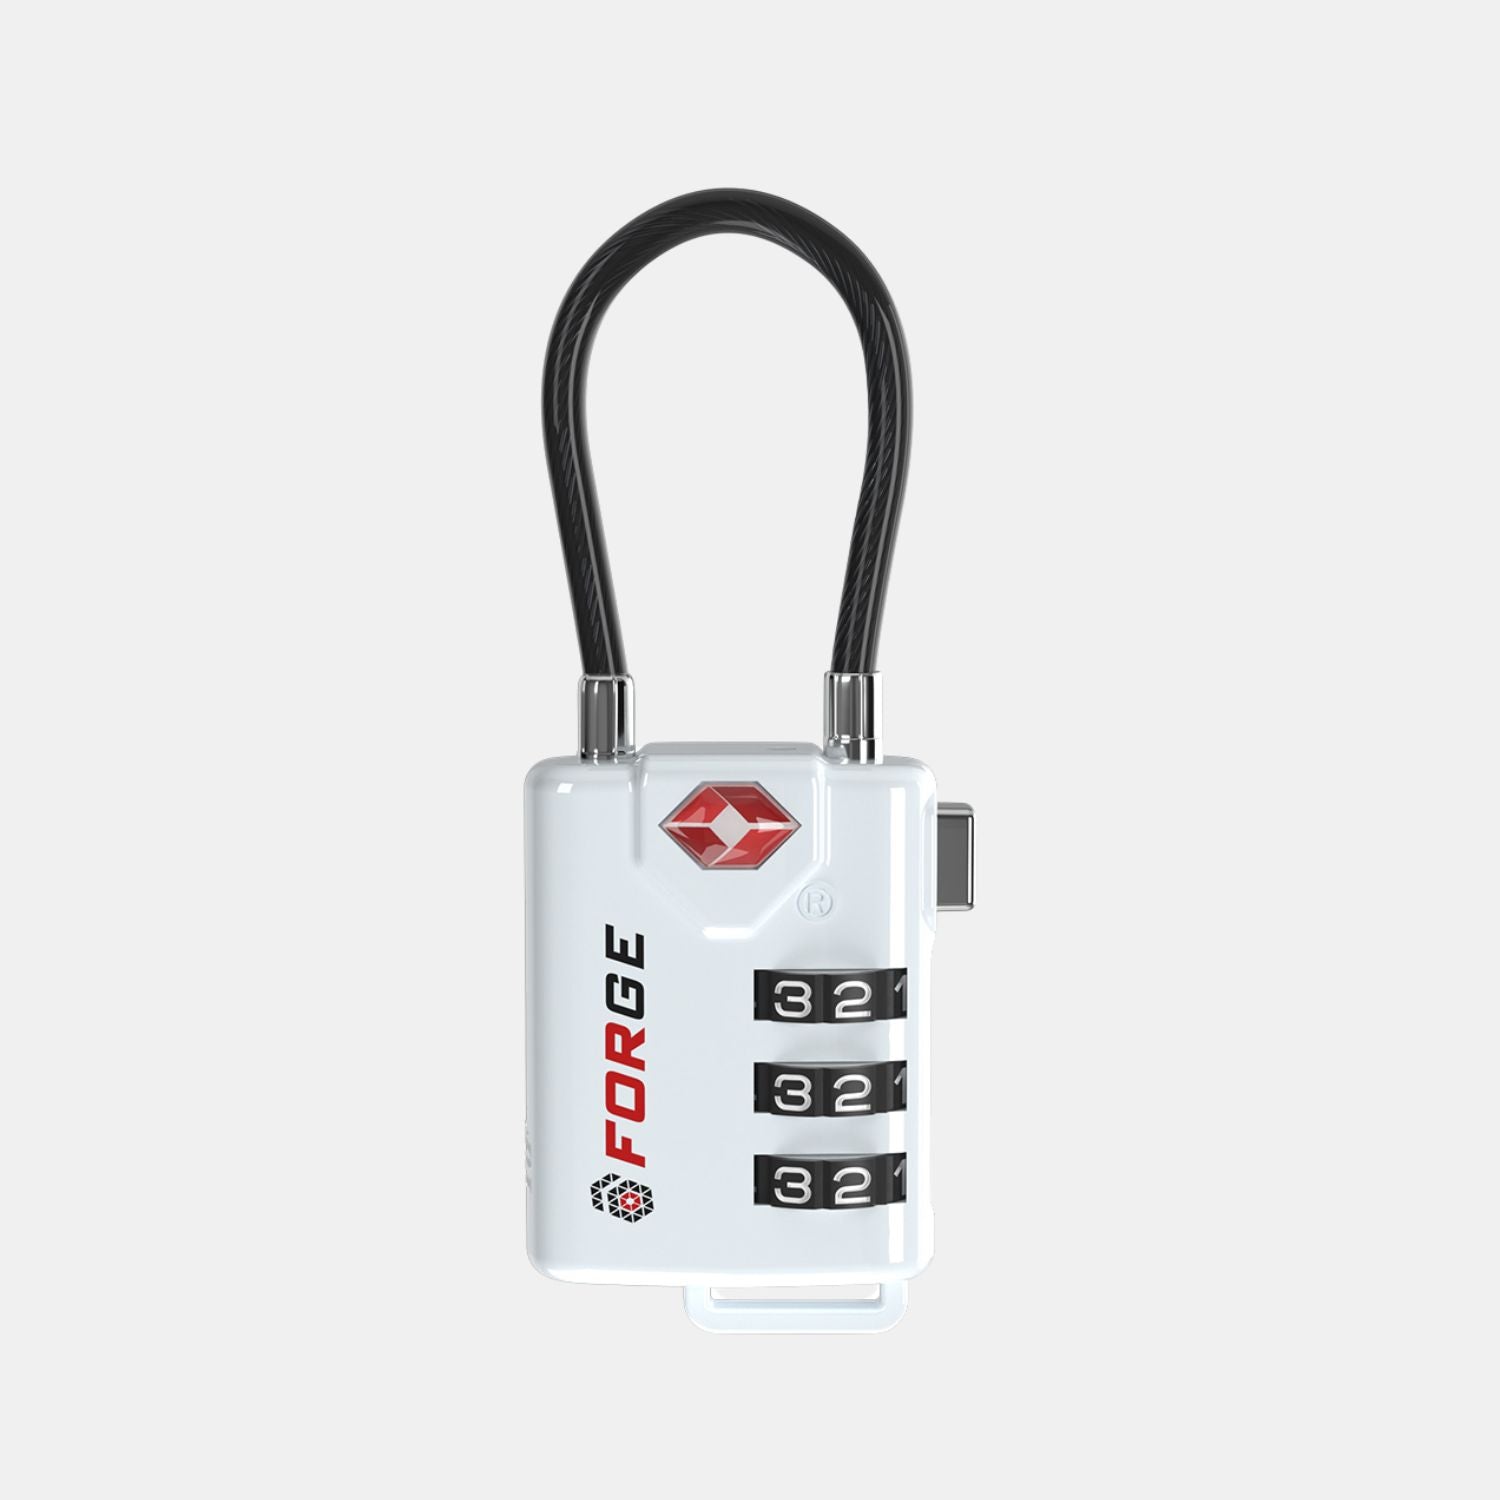 TSA Approved Cable Luggage Lock with Easy-to-Read Dials, White 2 Locks